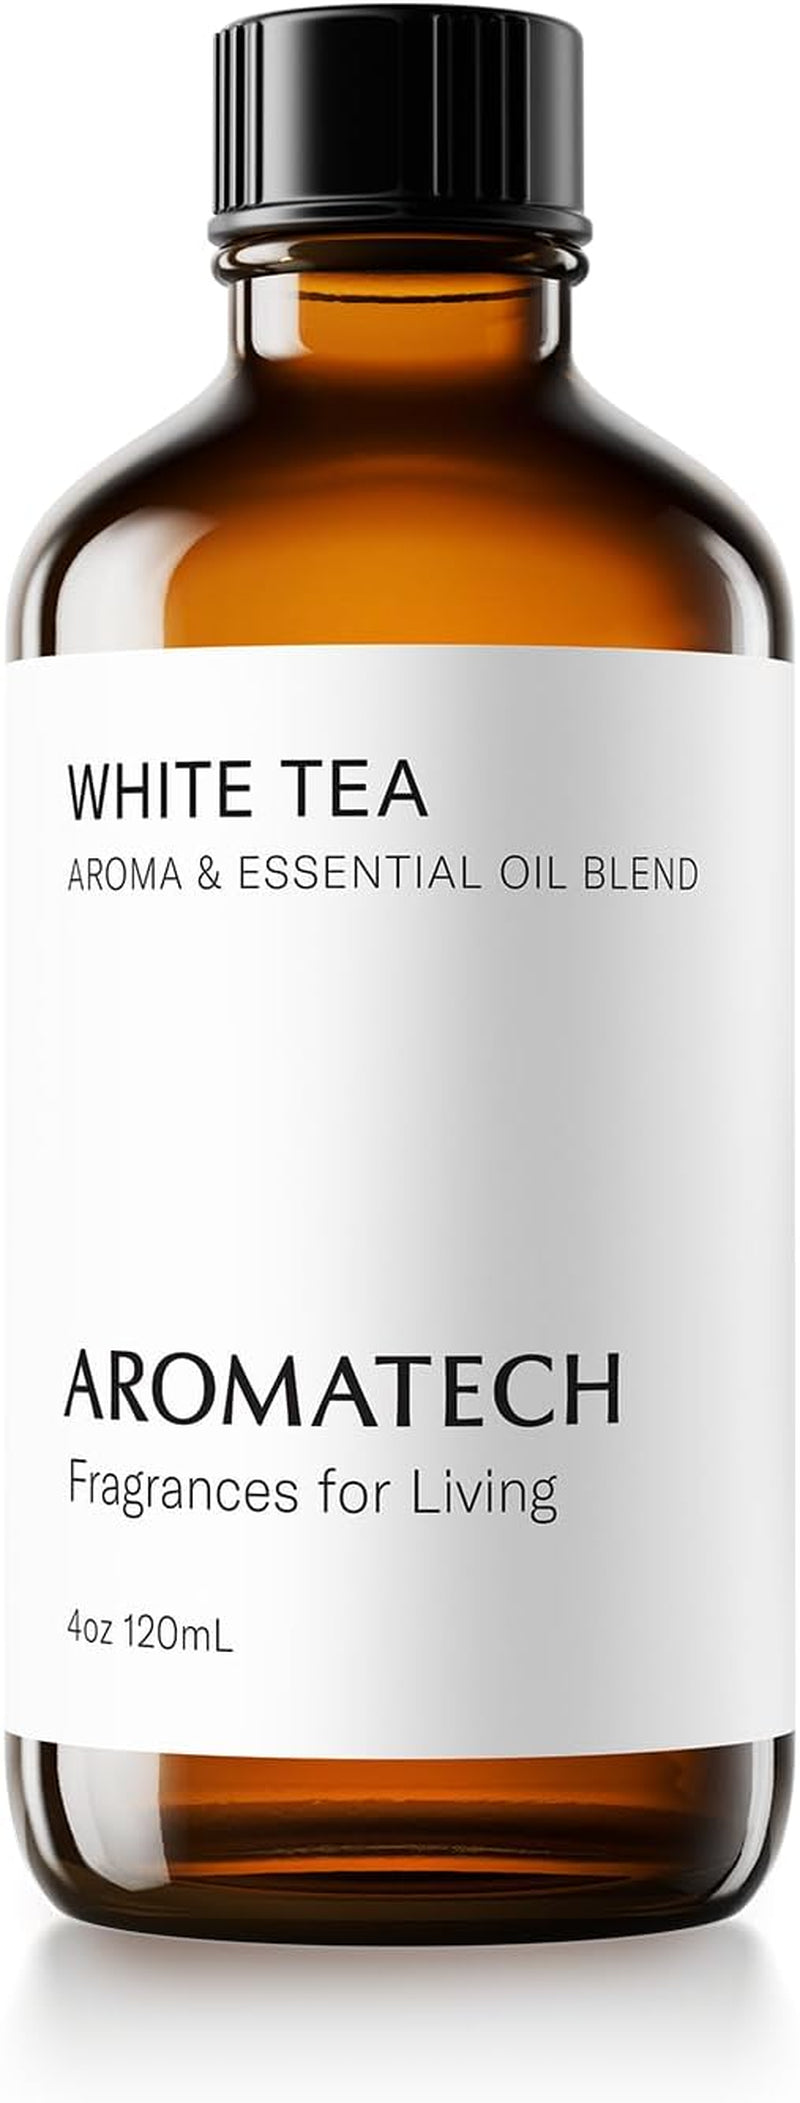 White Tea Aroma Essential Oil Blend Stocking Stuffers, Aromatherapy Diffuser Oil, Holiday Gifts with Palo Santos, Orange Zest, Tea Leaf & Amber for Diffuser, Humidifier - 4 Fl Oz, 120 Ml